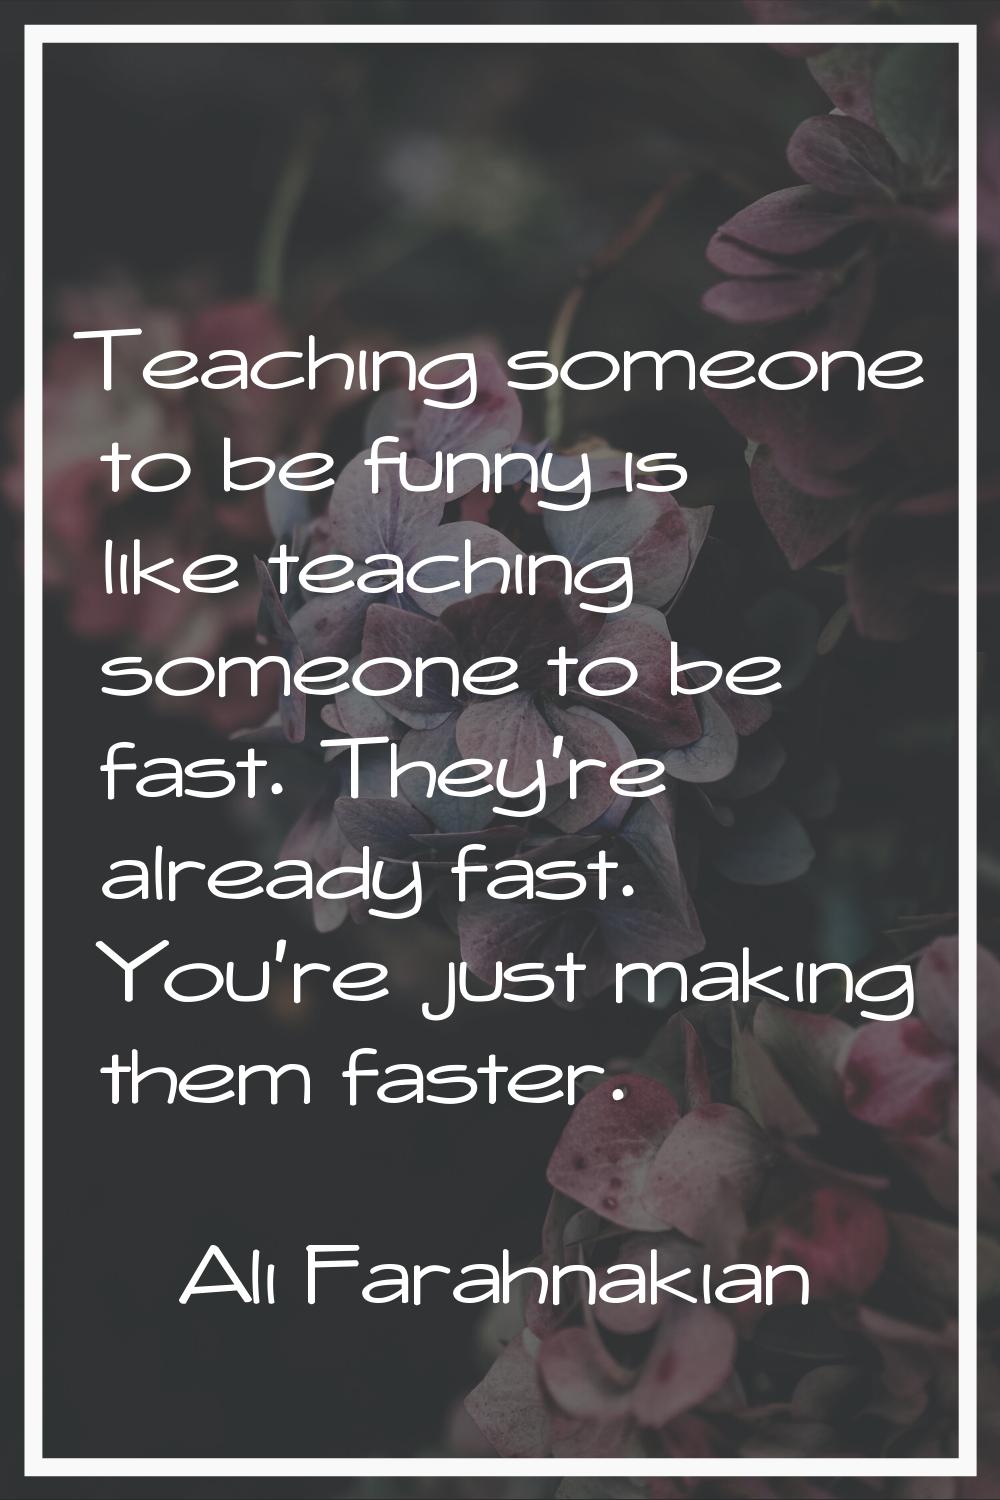 Teaching someone to be funny is like teaching someone to be fast. They're already fast. You're just